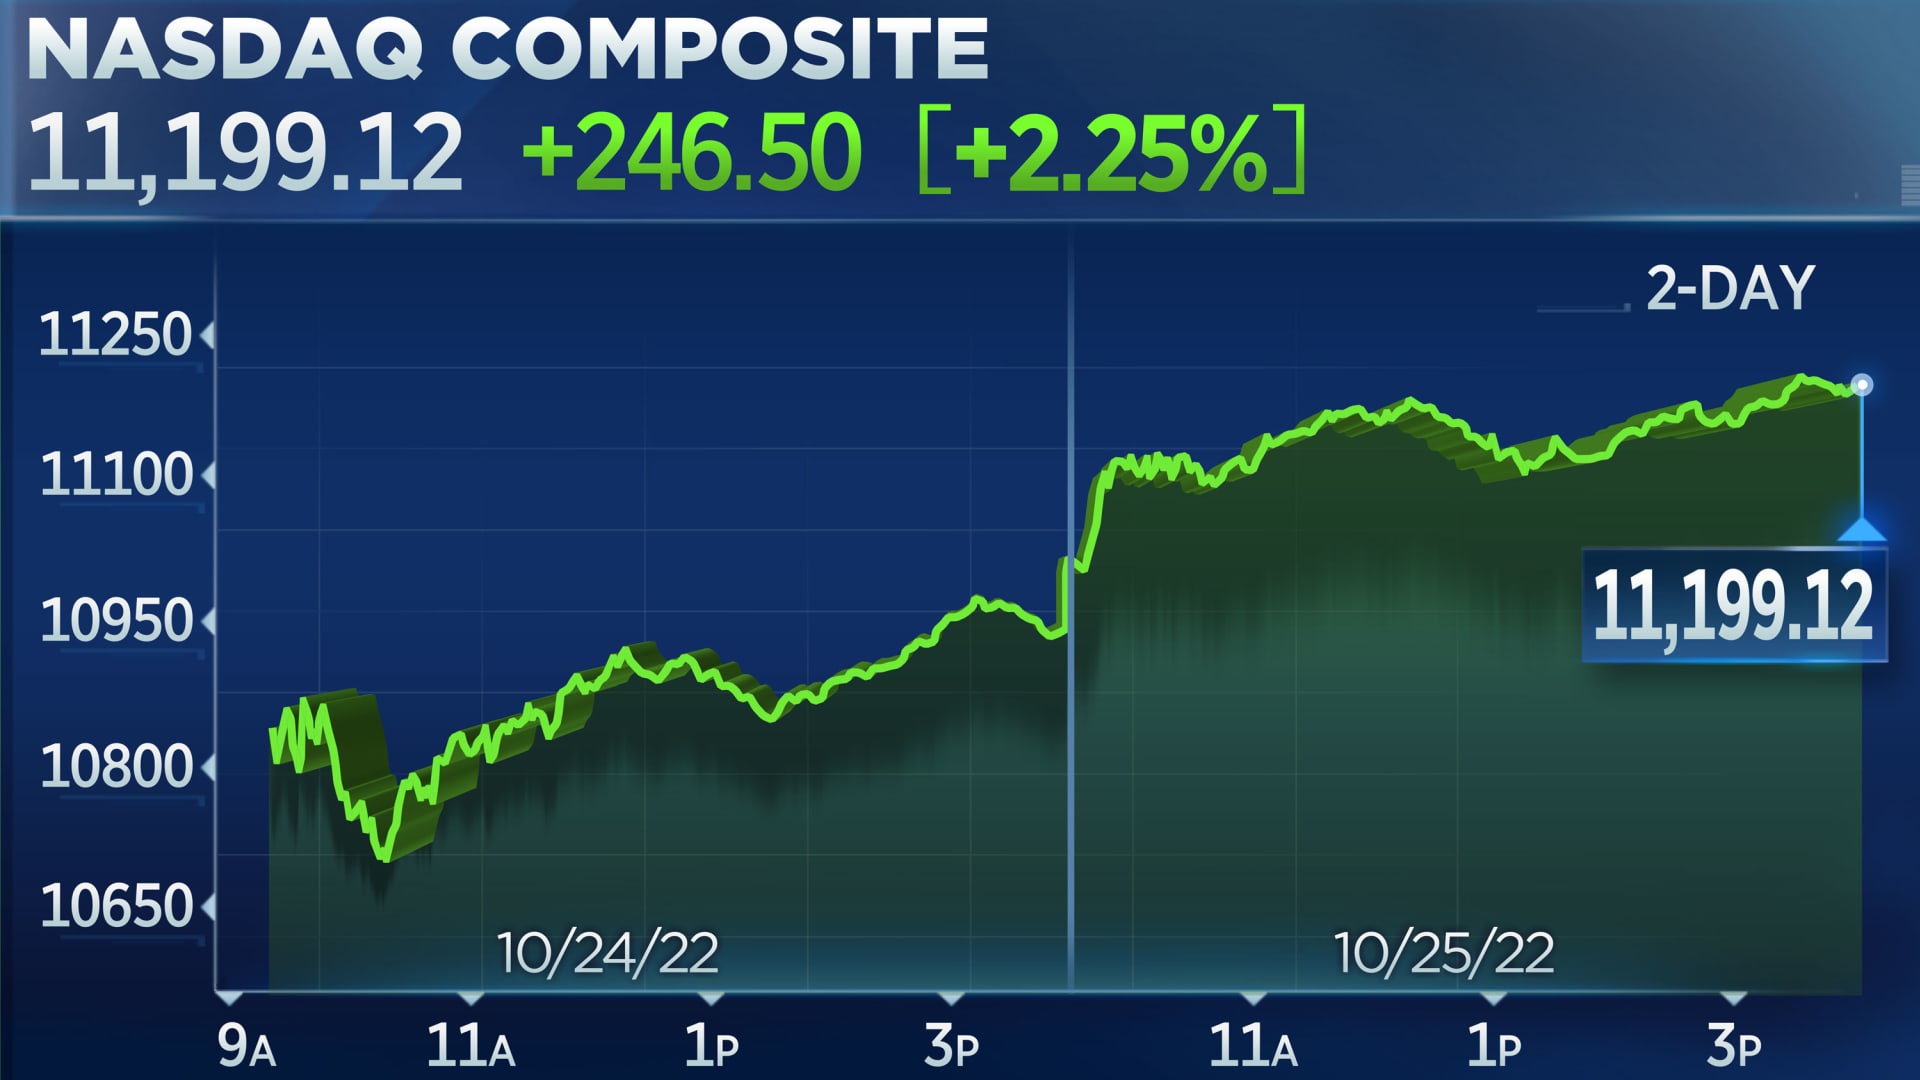 Stocks close higher for third consecutive day, Nasdaq adds 2.2 ahead